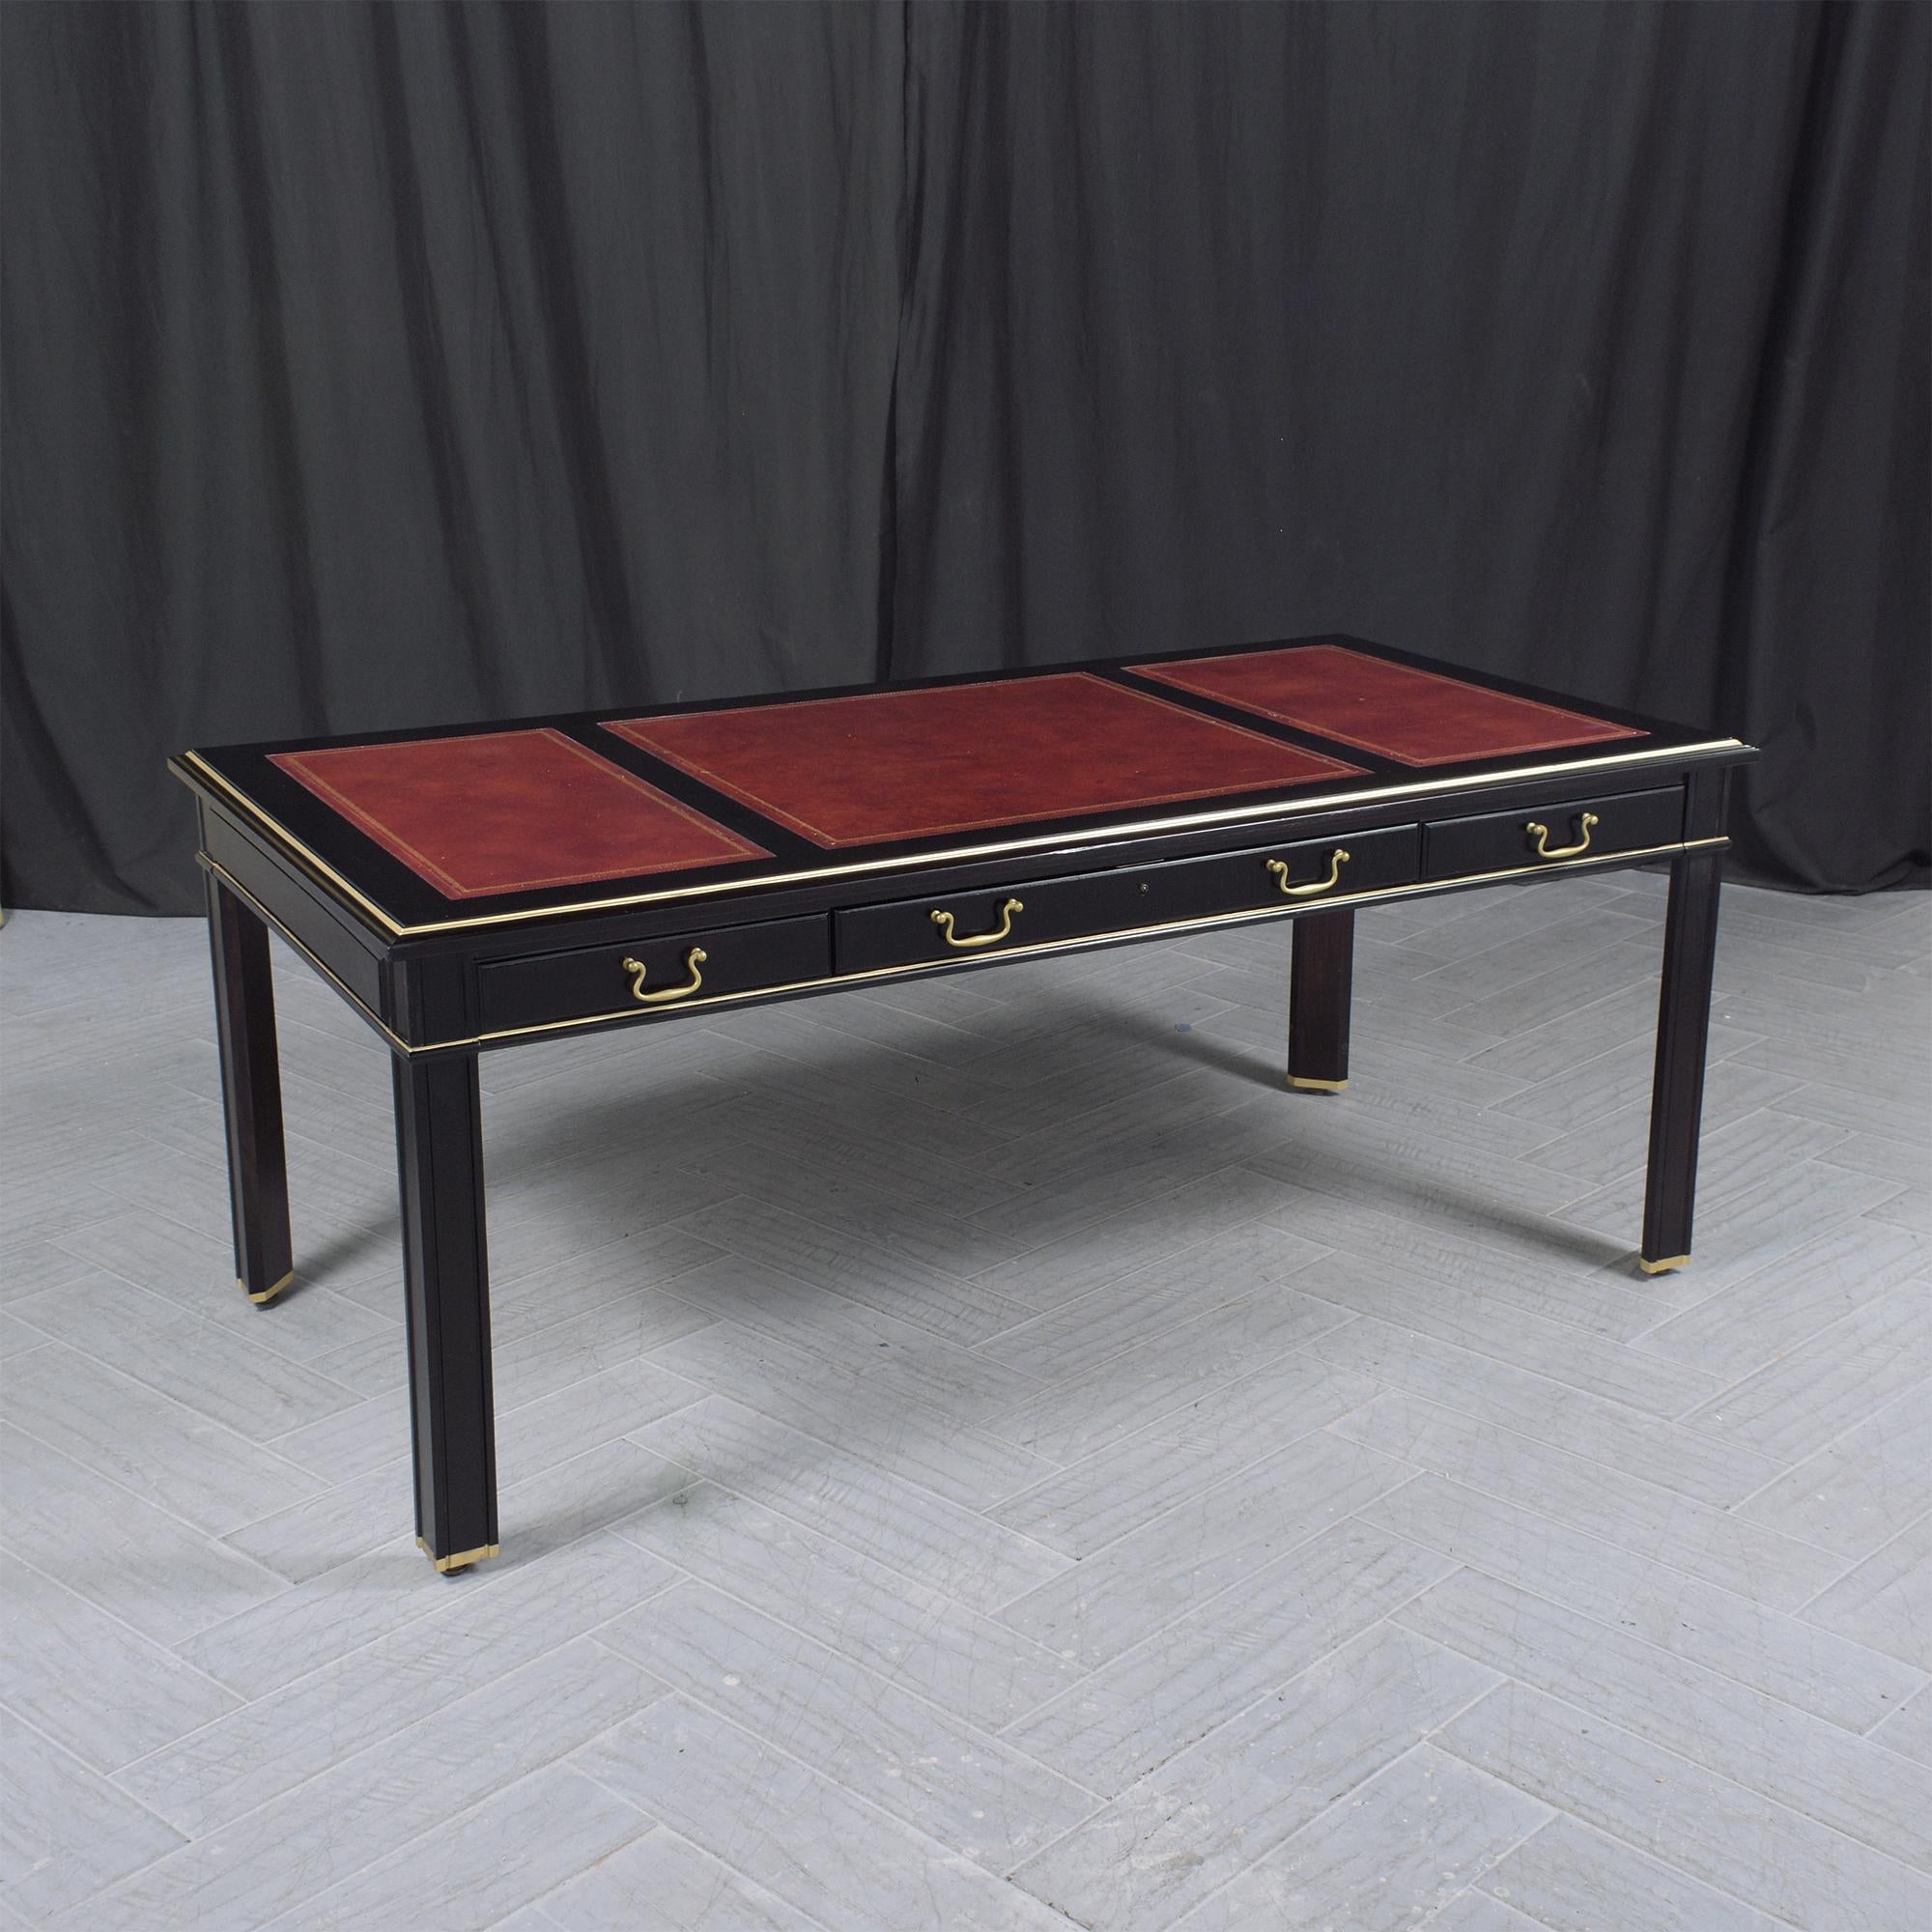 1970s Louis XVI Executive Desk: A Legacy of Elegance and Craftsmanship 5